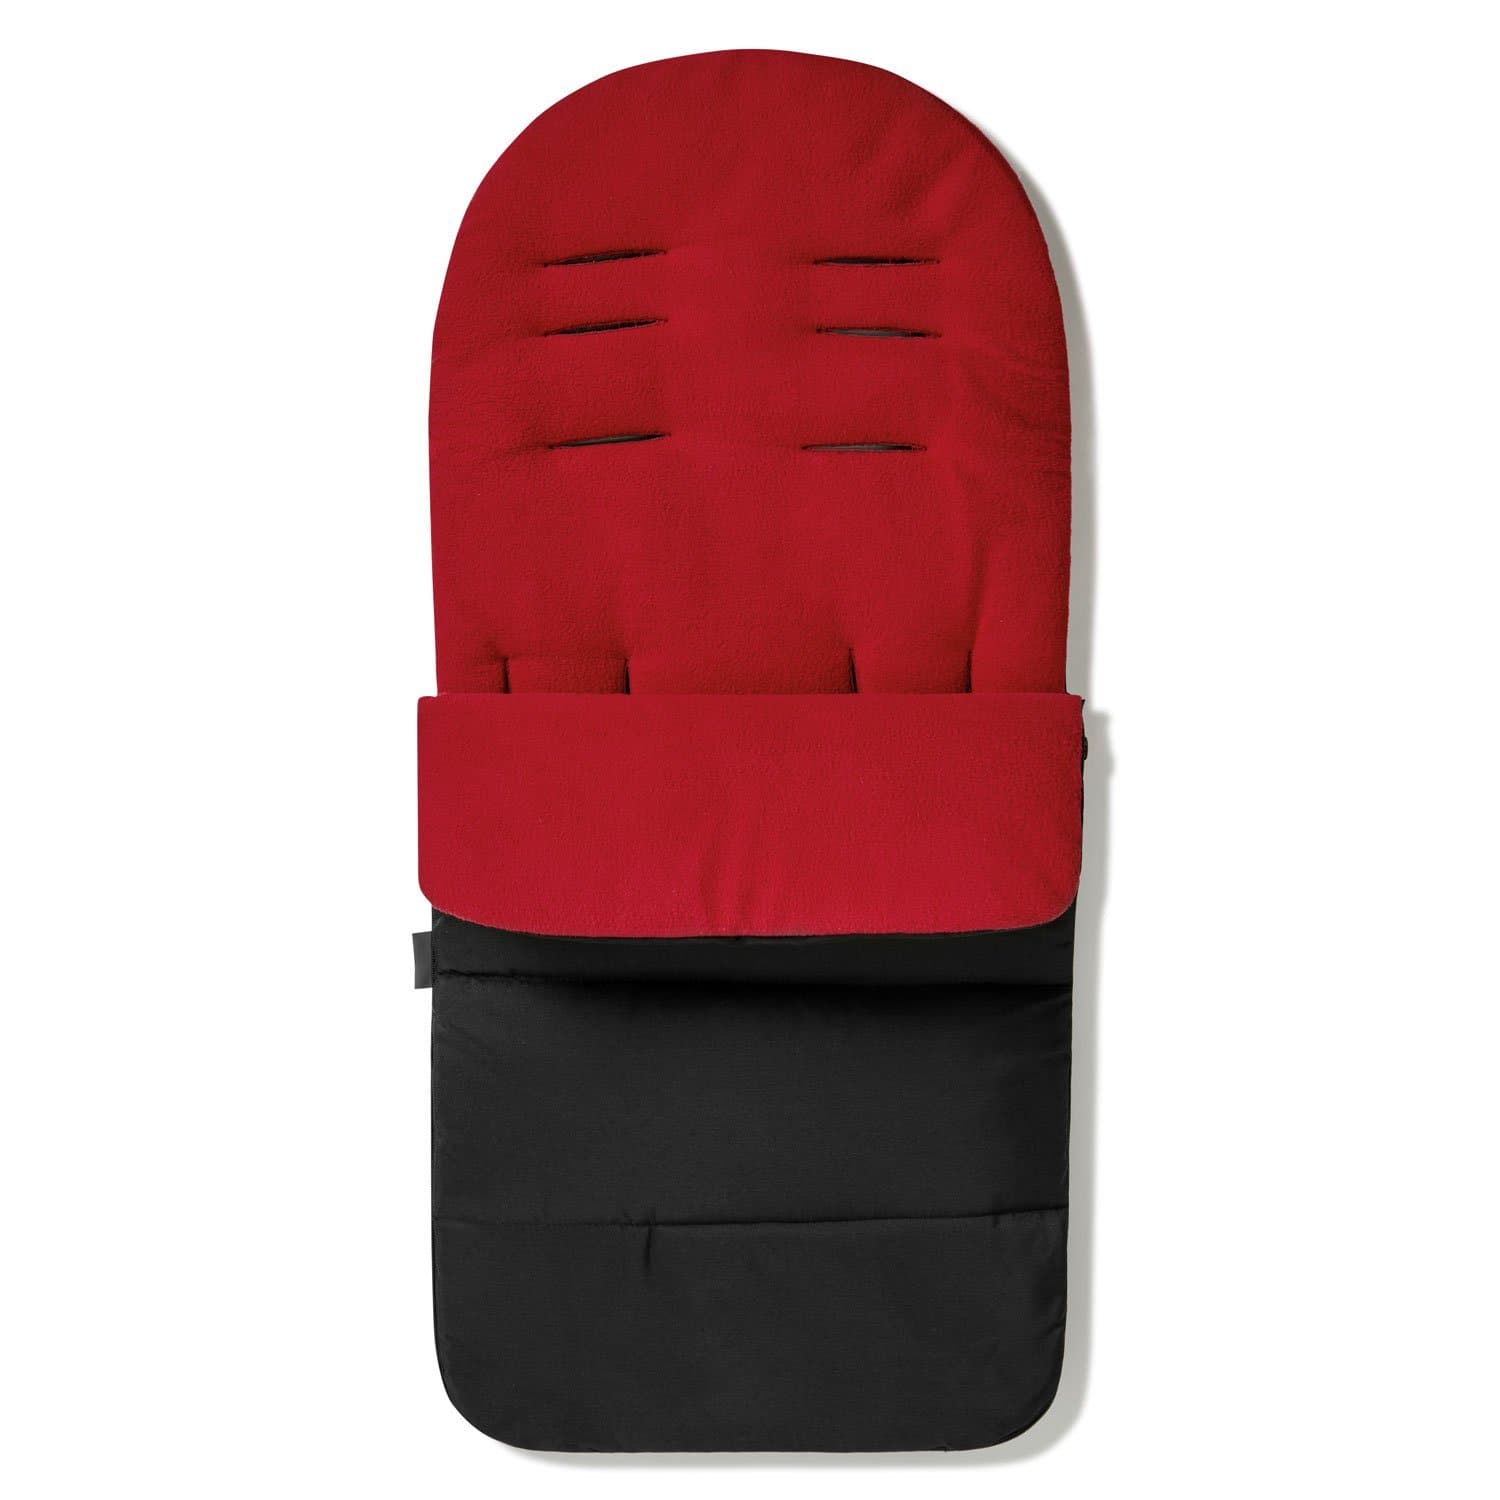 Premium Footmuff / Cosy Toes Compatible with Firstwheels - Fire Red / Fits All Models | For Your Little One